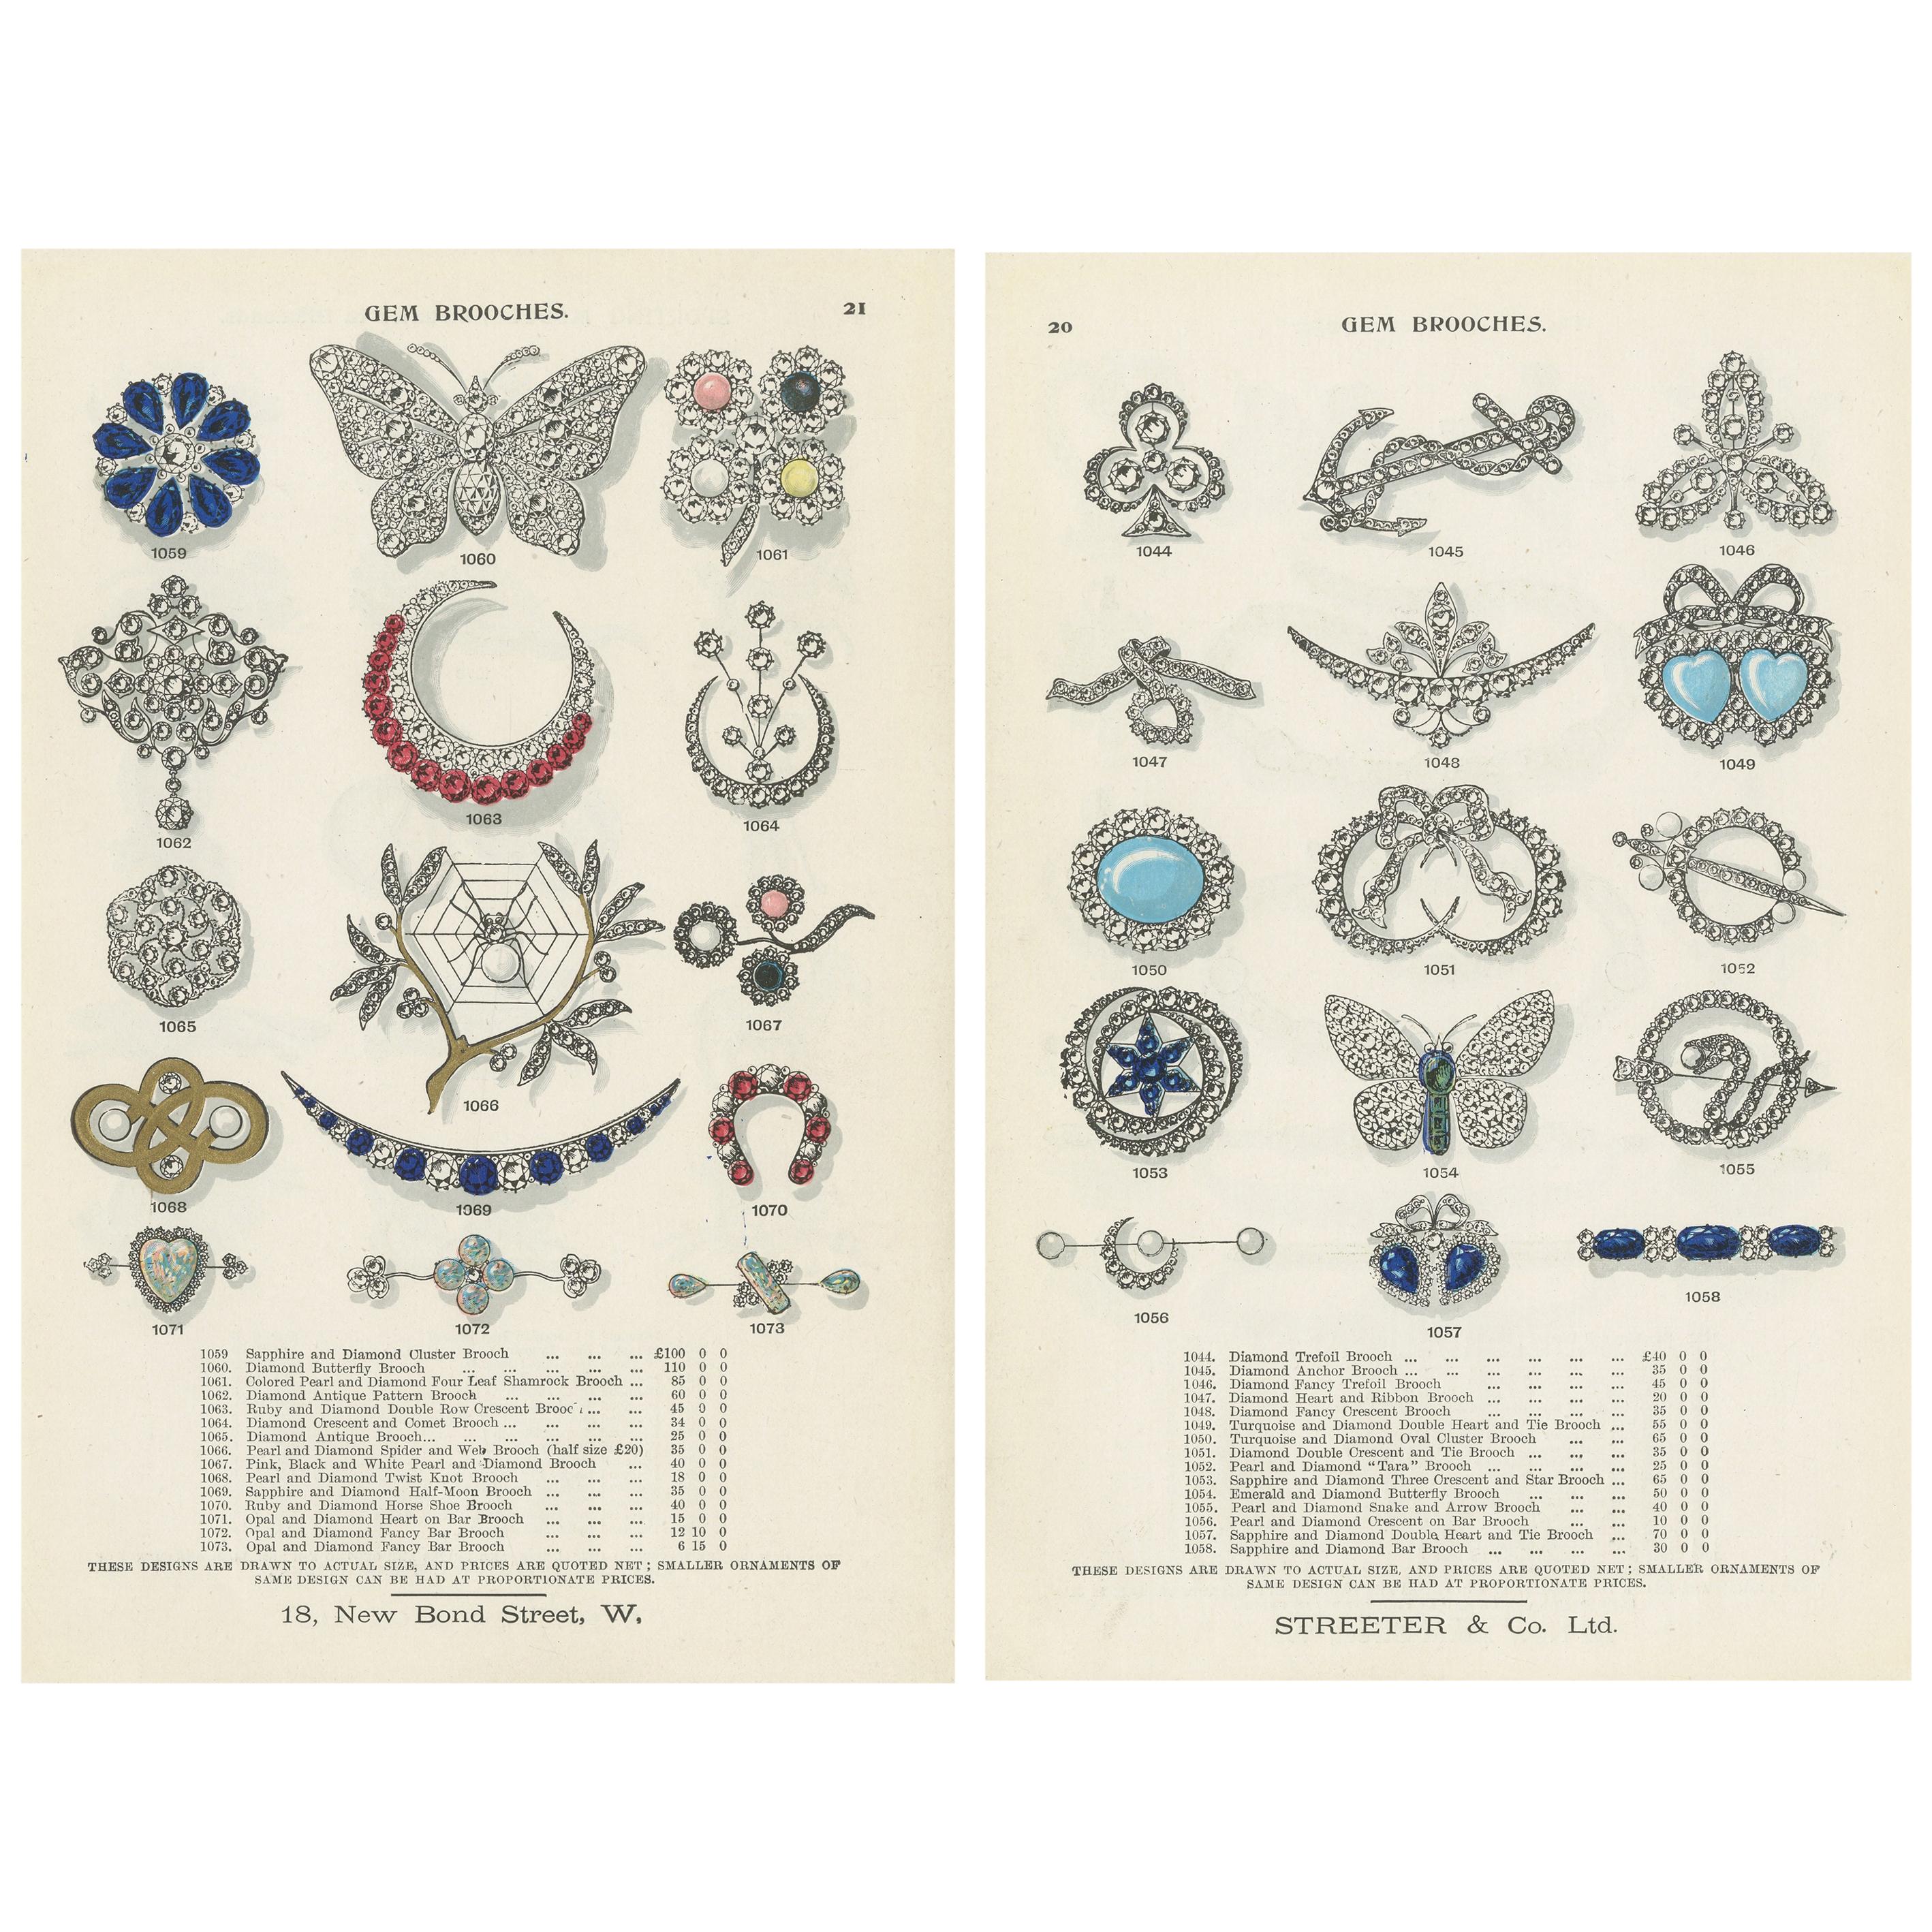 Set of Two Antique Prints of Gem Brooches by Streeter '1898'